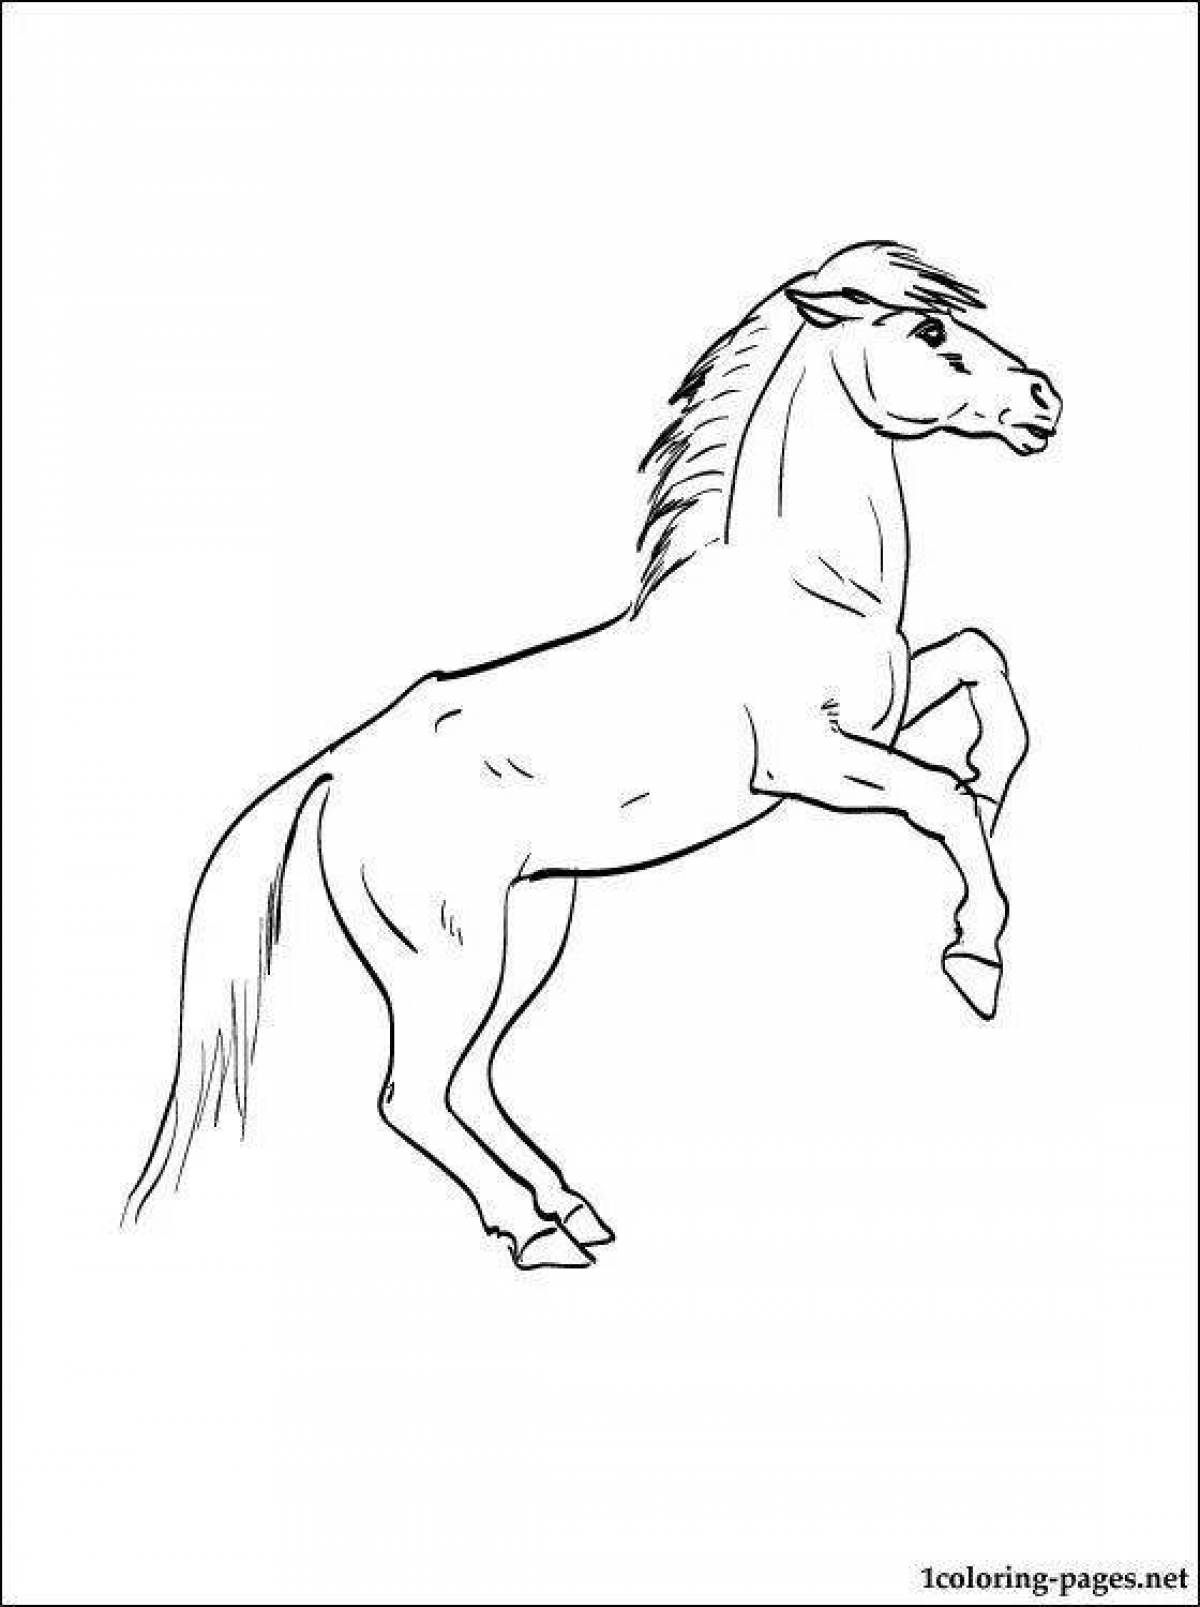 Coloring of the ingenious Przewalski's horse